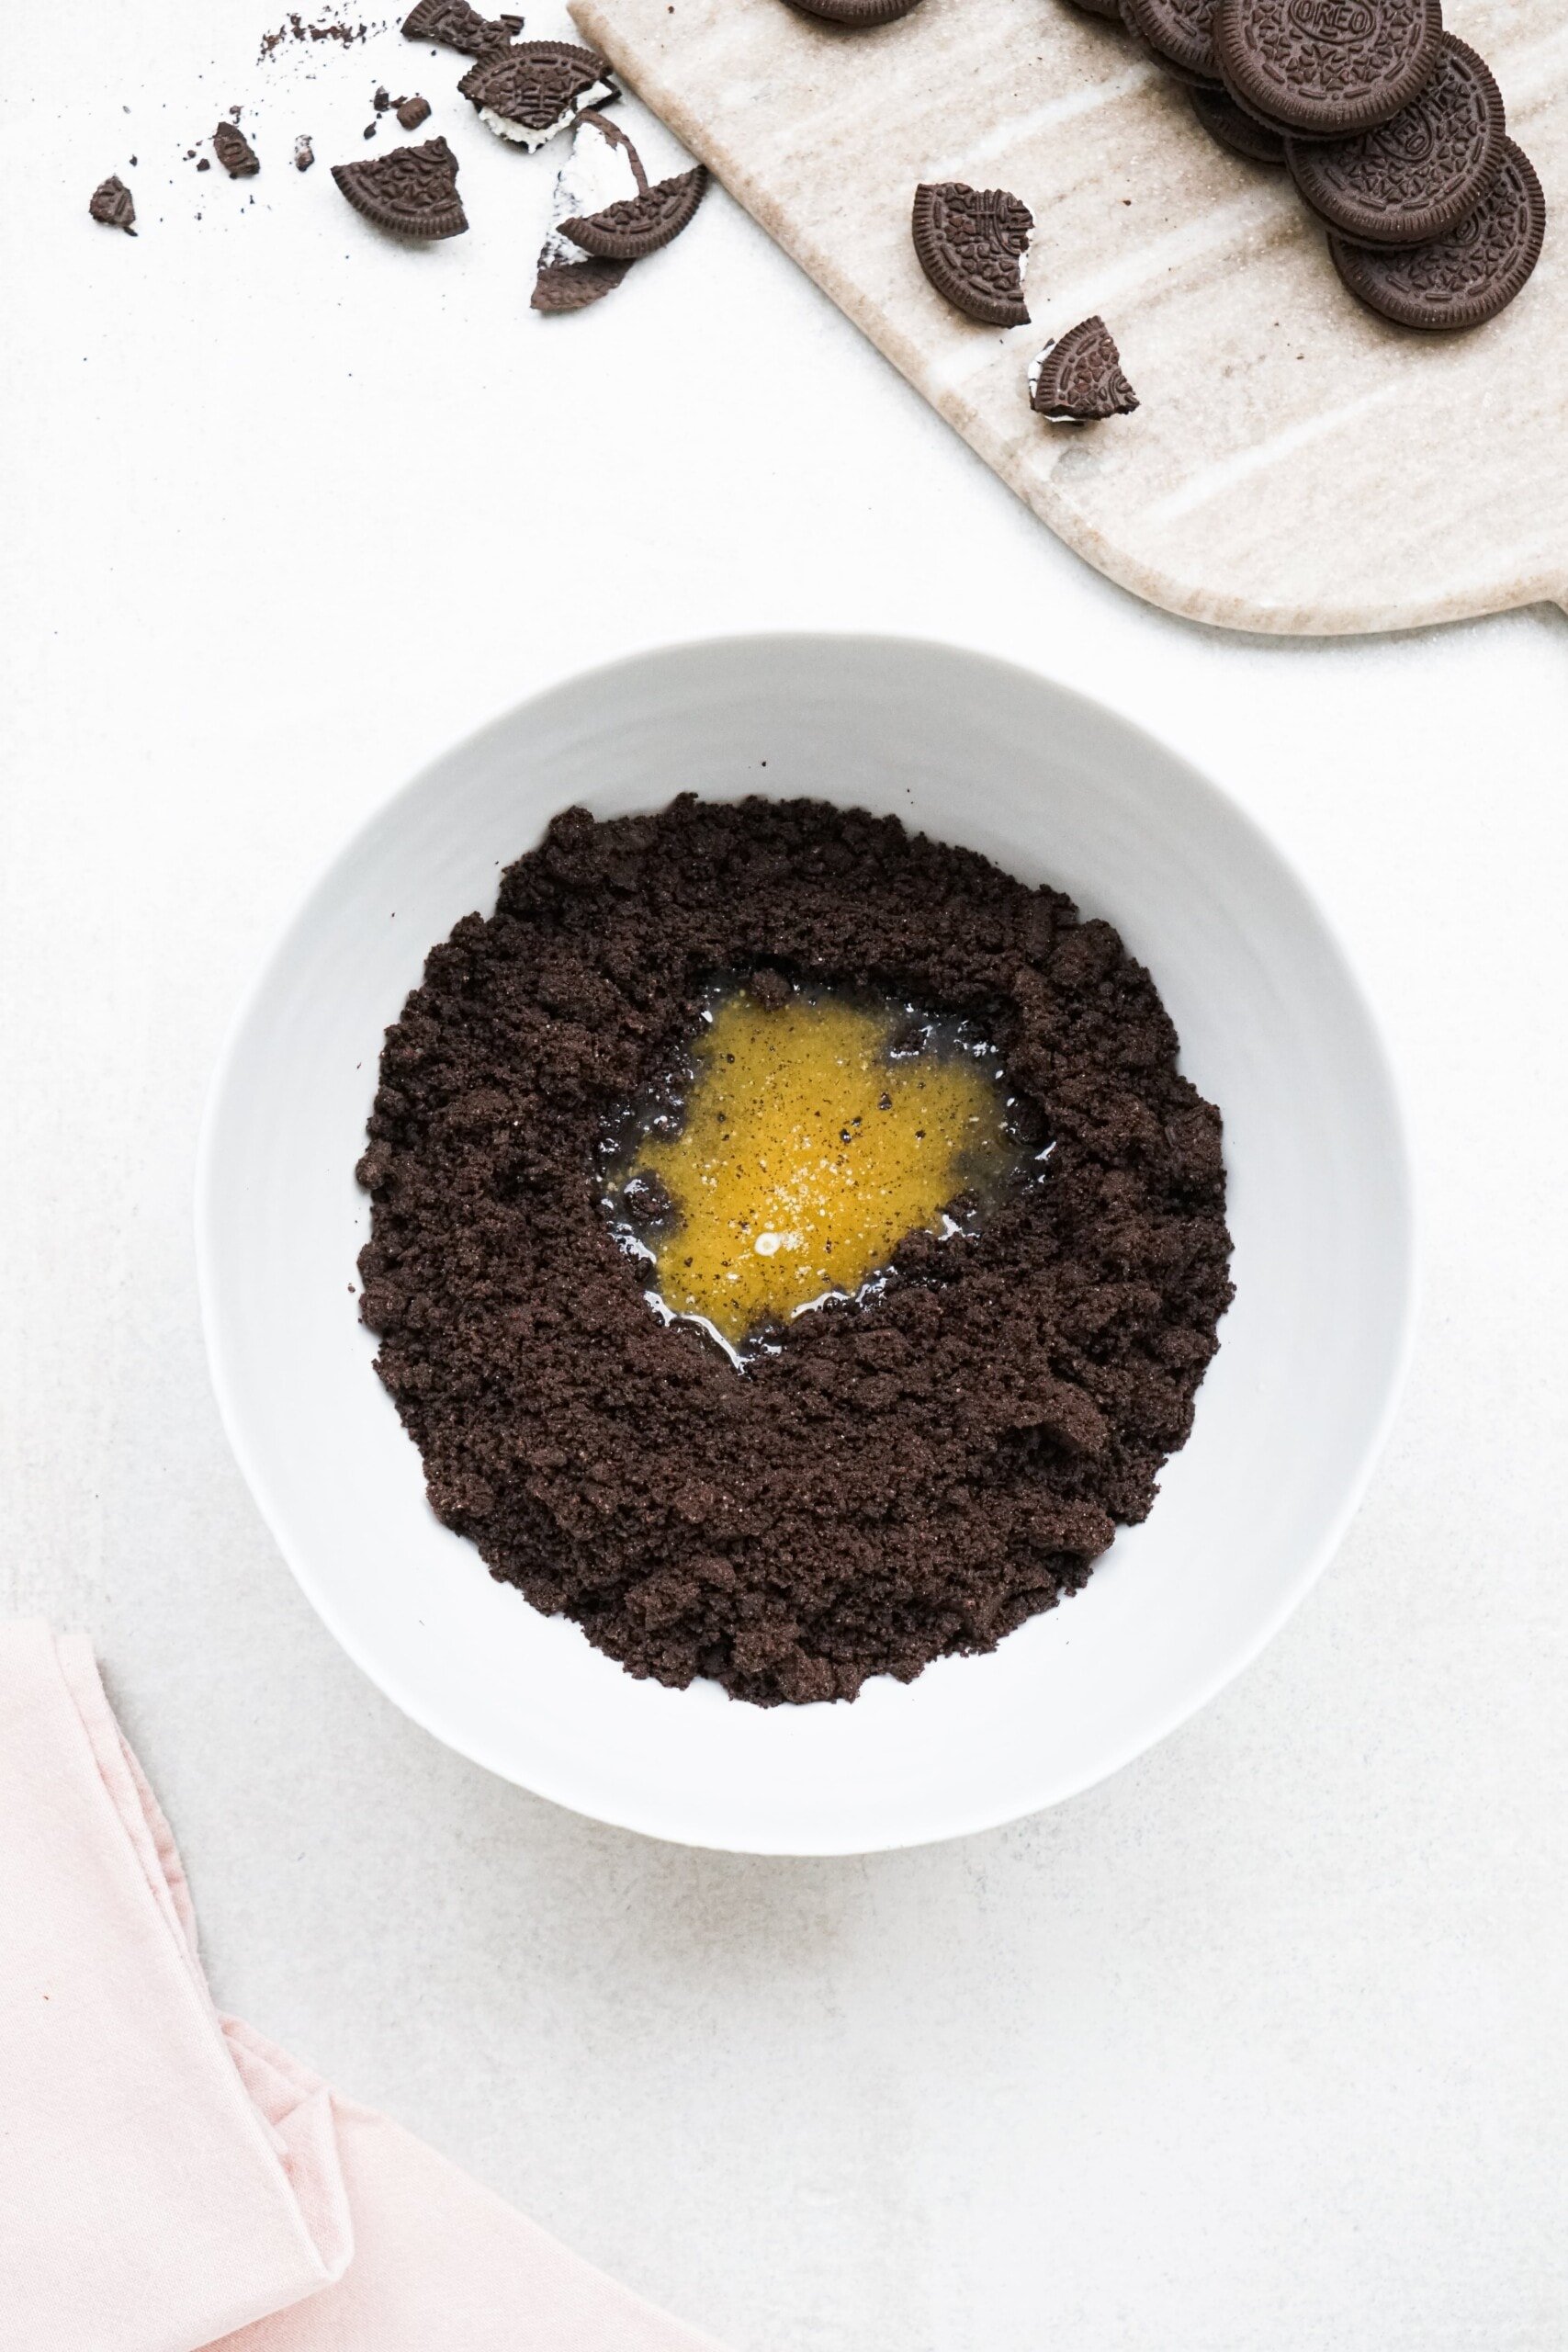 Oreo crumbles and egg in a bowl